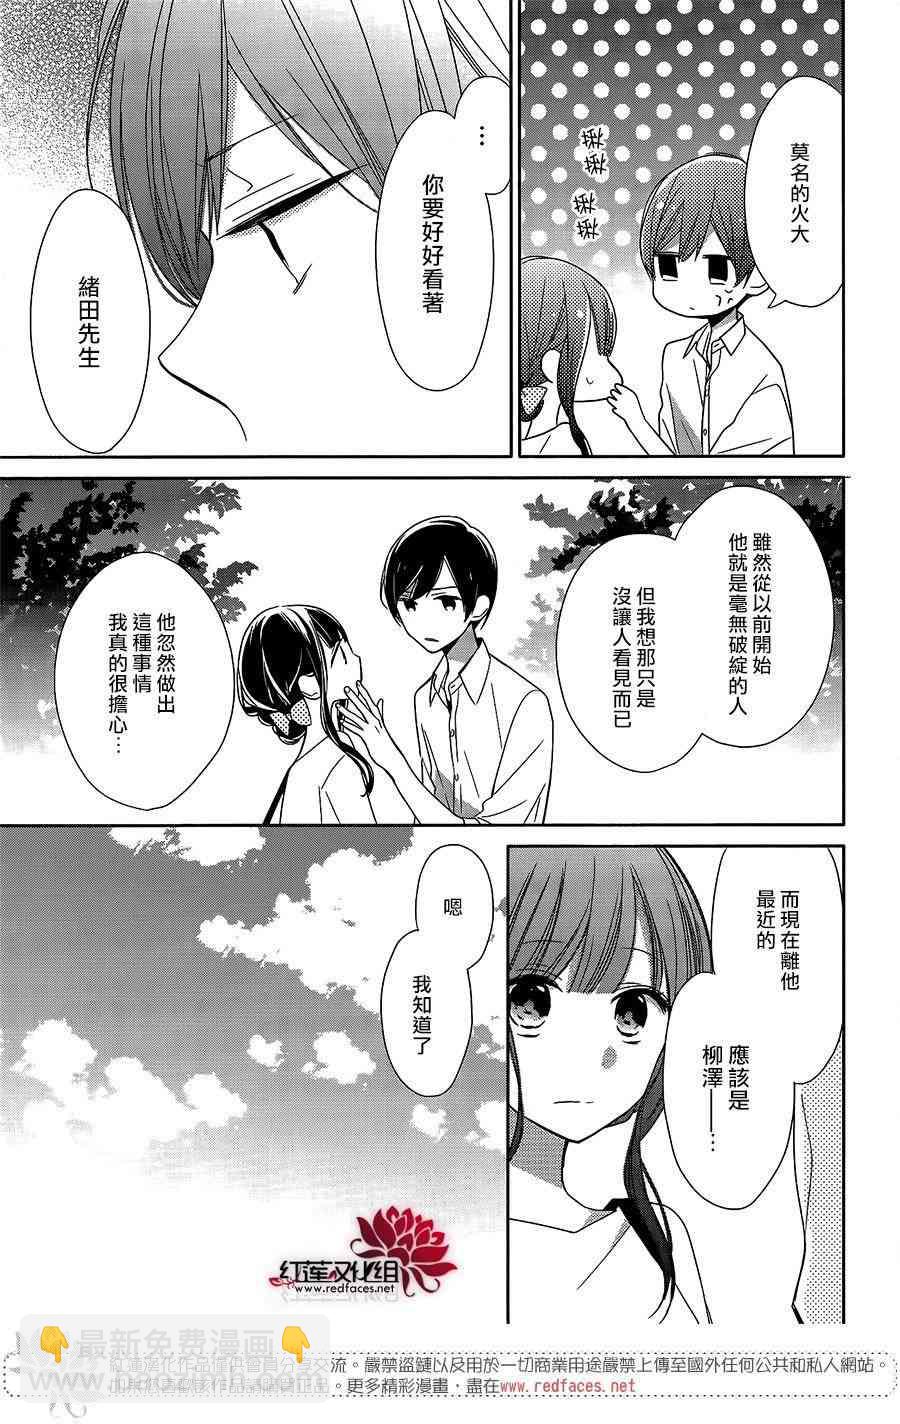 If given a second chance - 7話 - 3